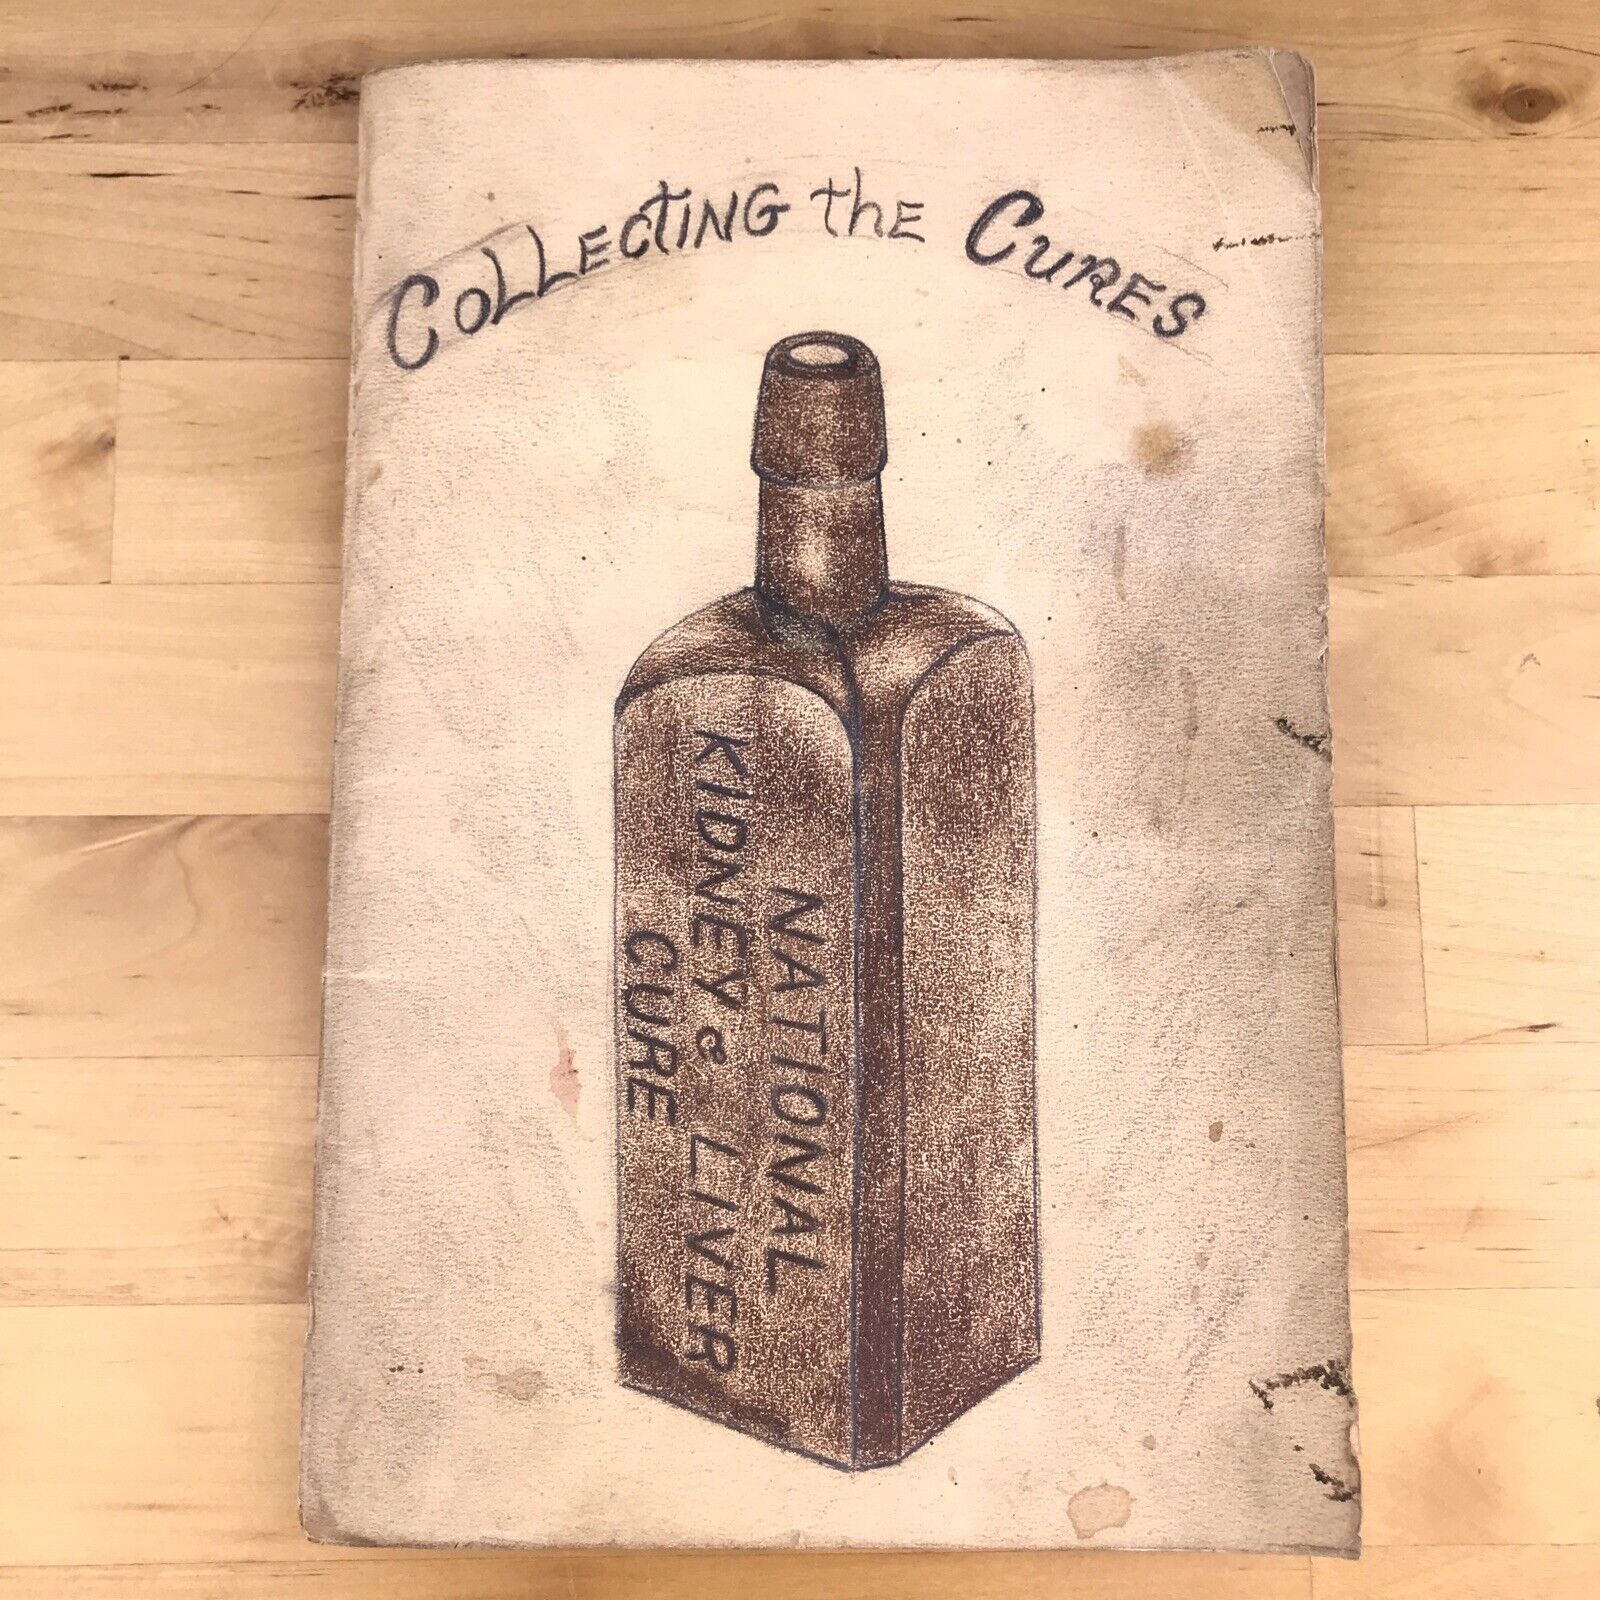 Rare - Signed - 1969 Collecting The Cures Medical Bottle Price Guide Bill Agee